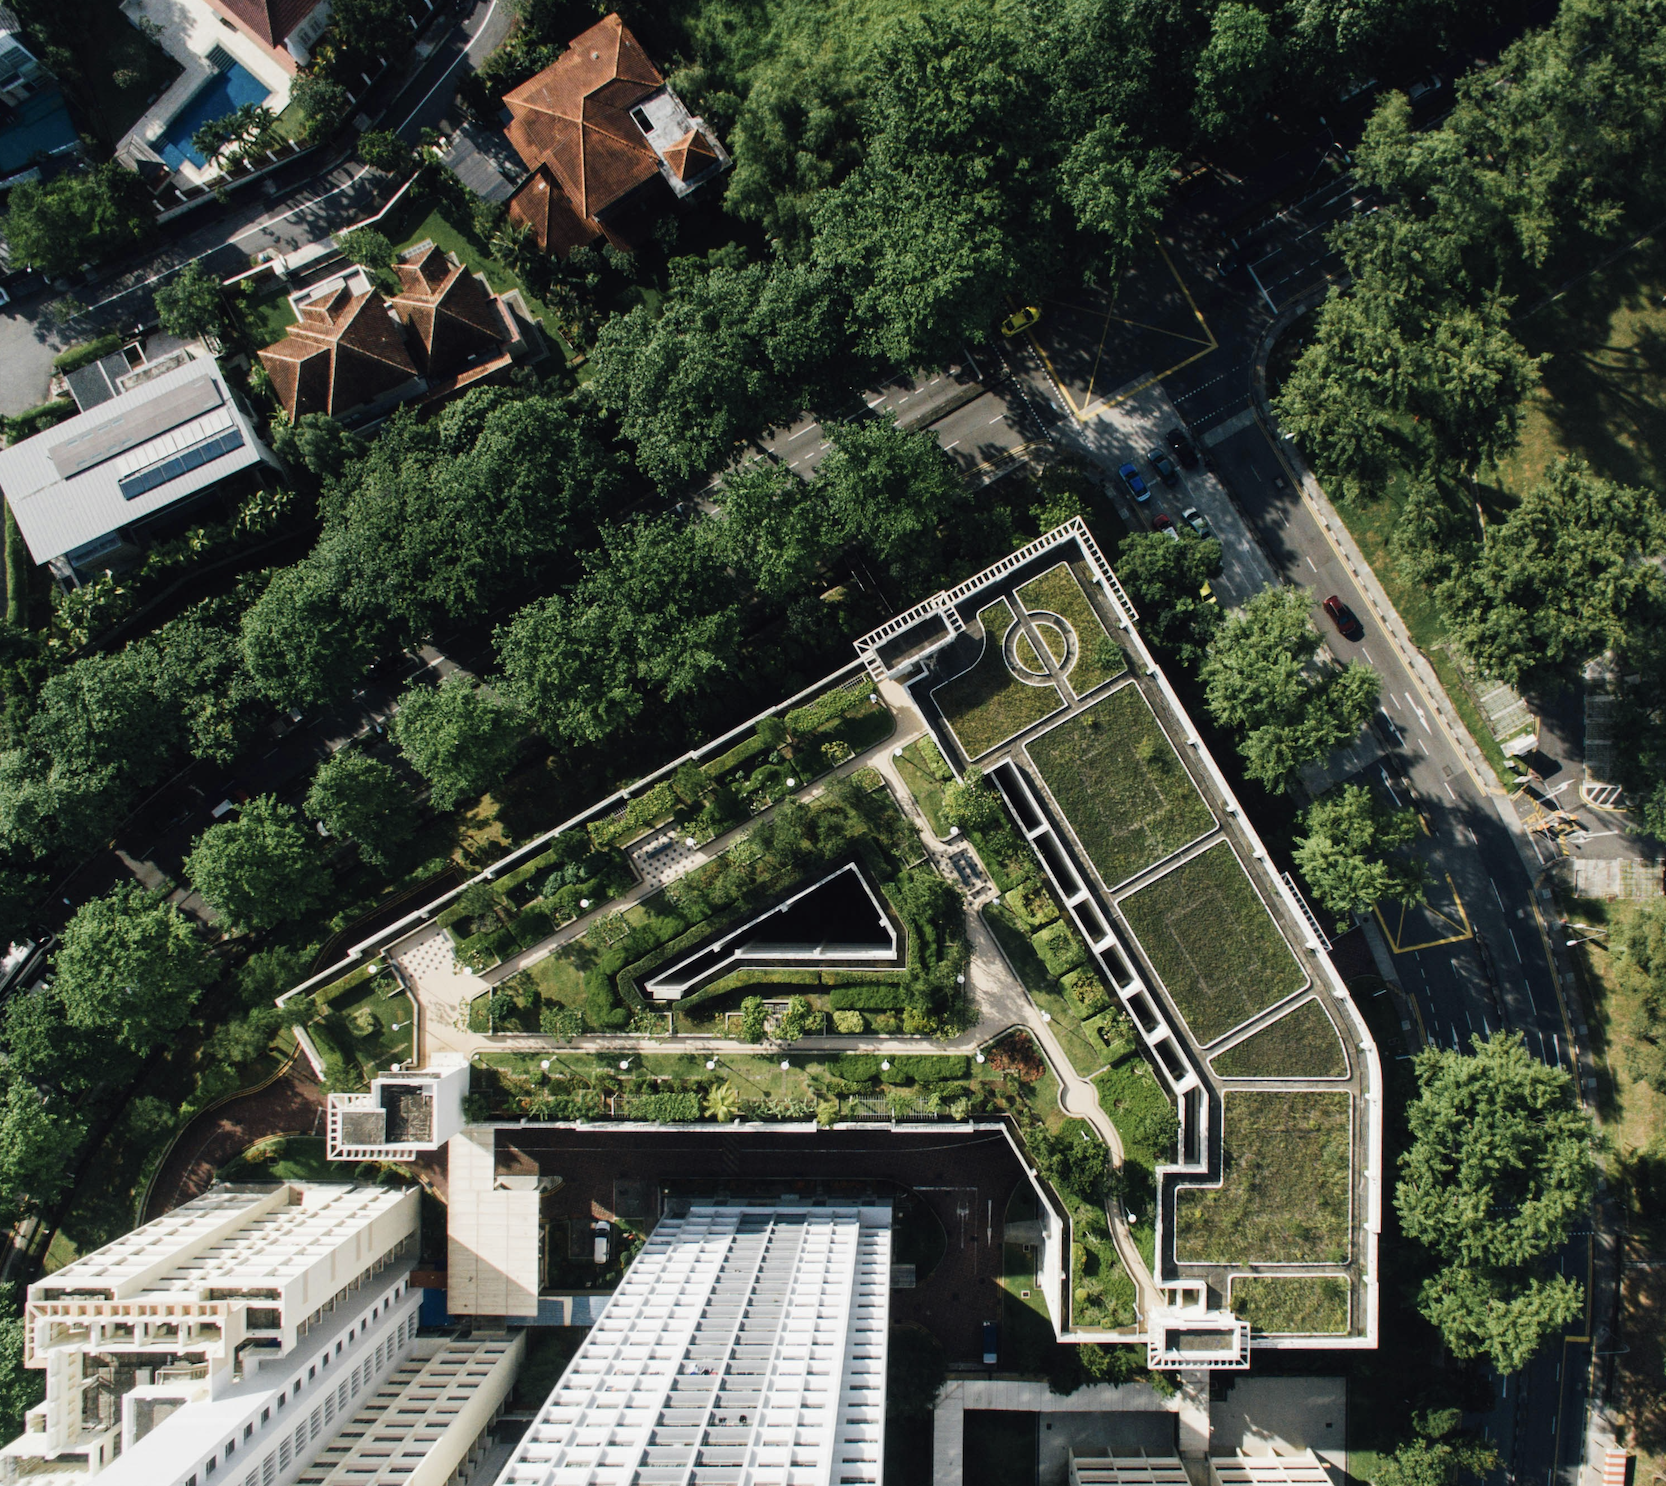 Green roof in urban space